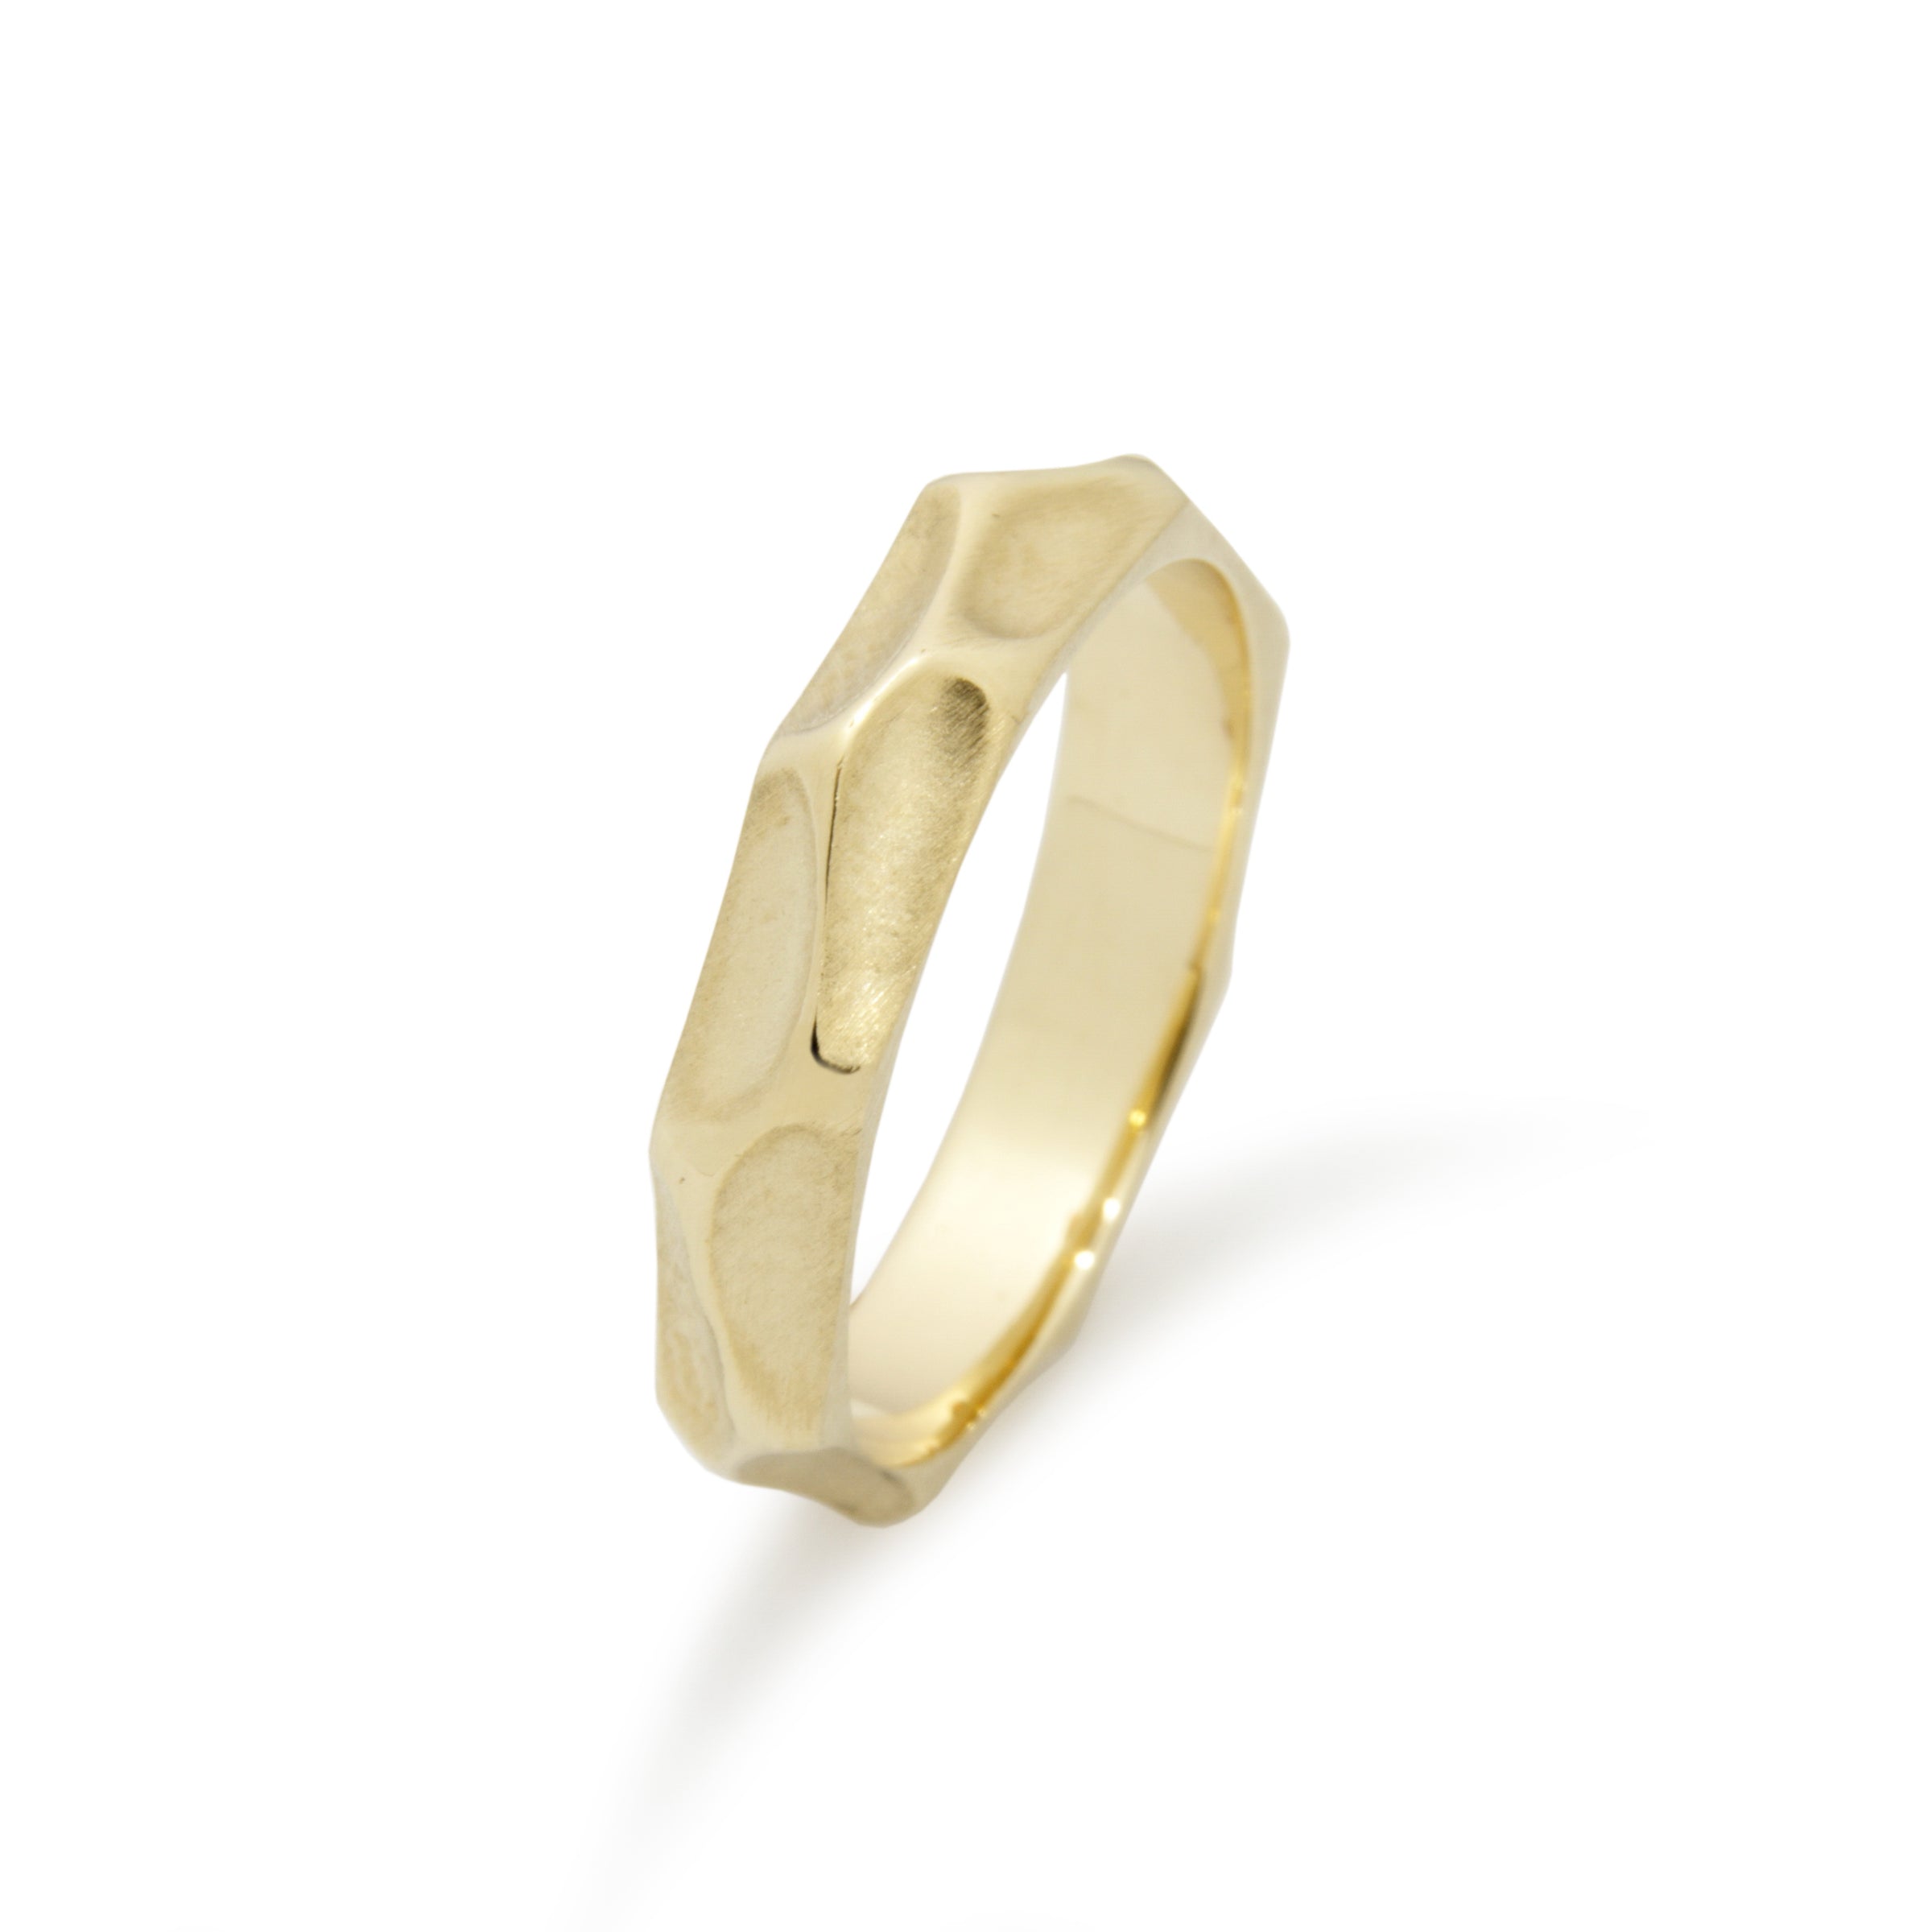 3mm Yellow Gold Wedding Ring, Polished or Matte – brightsmith